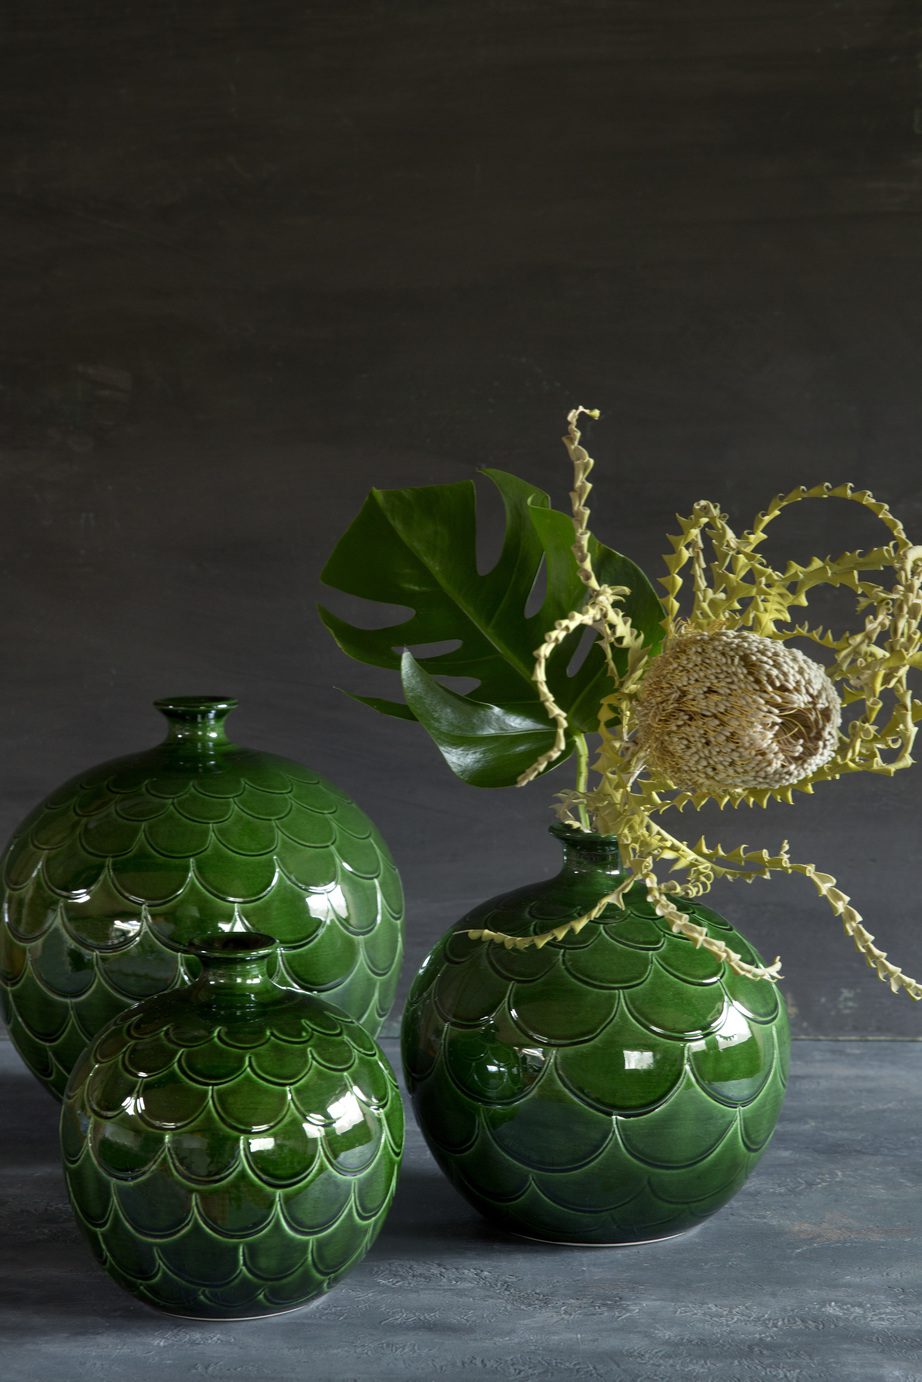 Three green glazed round-shaped vases with a pattern of petals.